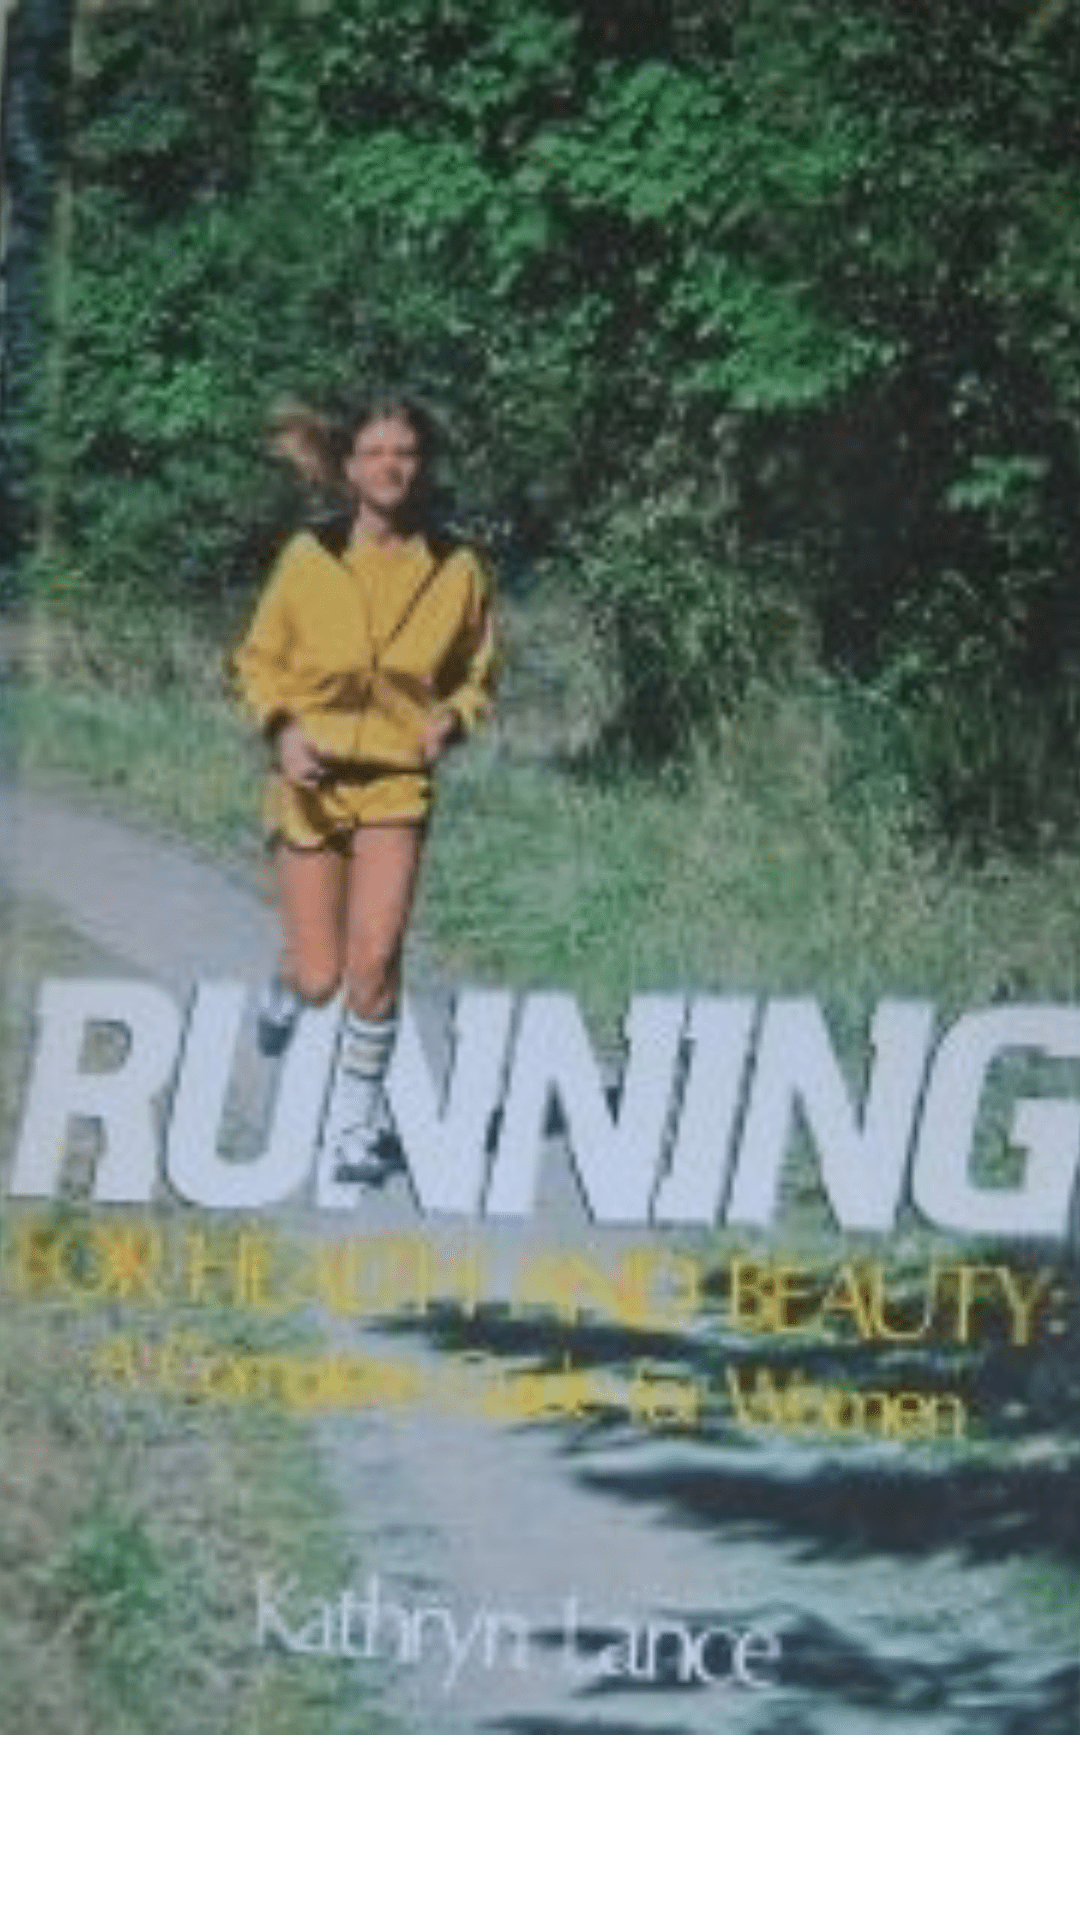 Running for Health and Beauty